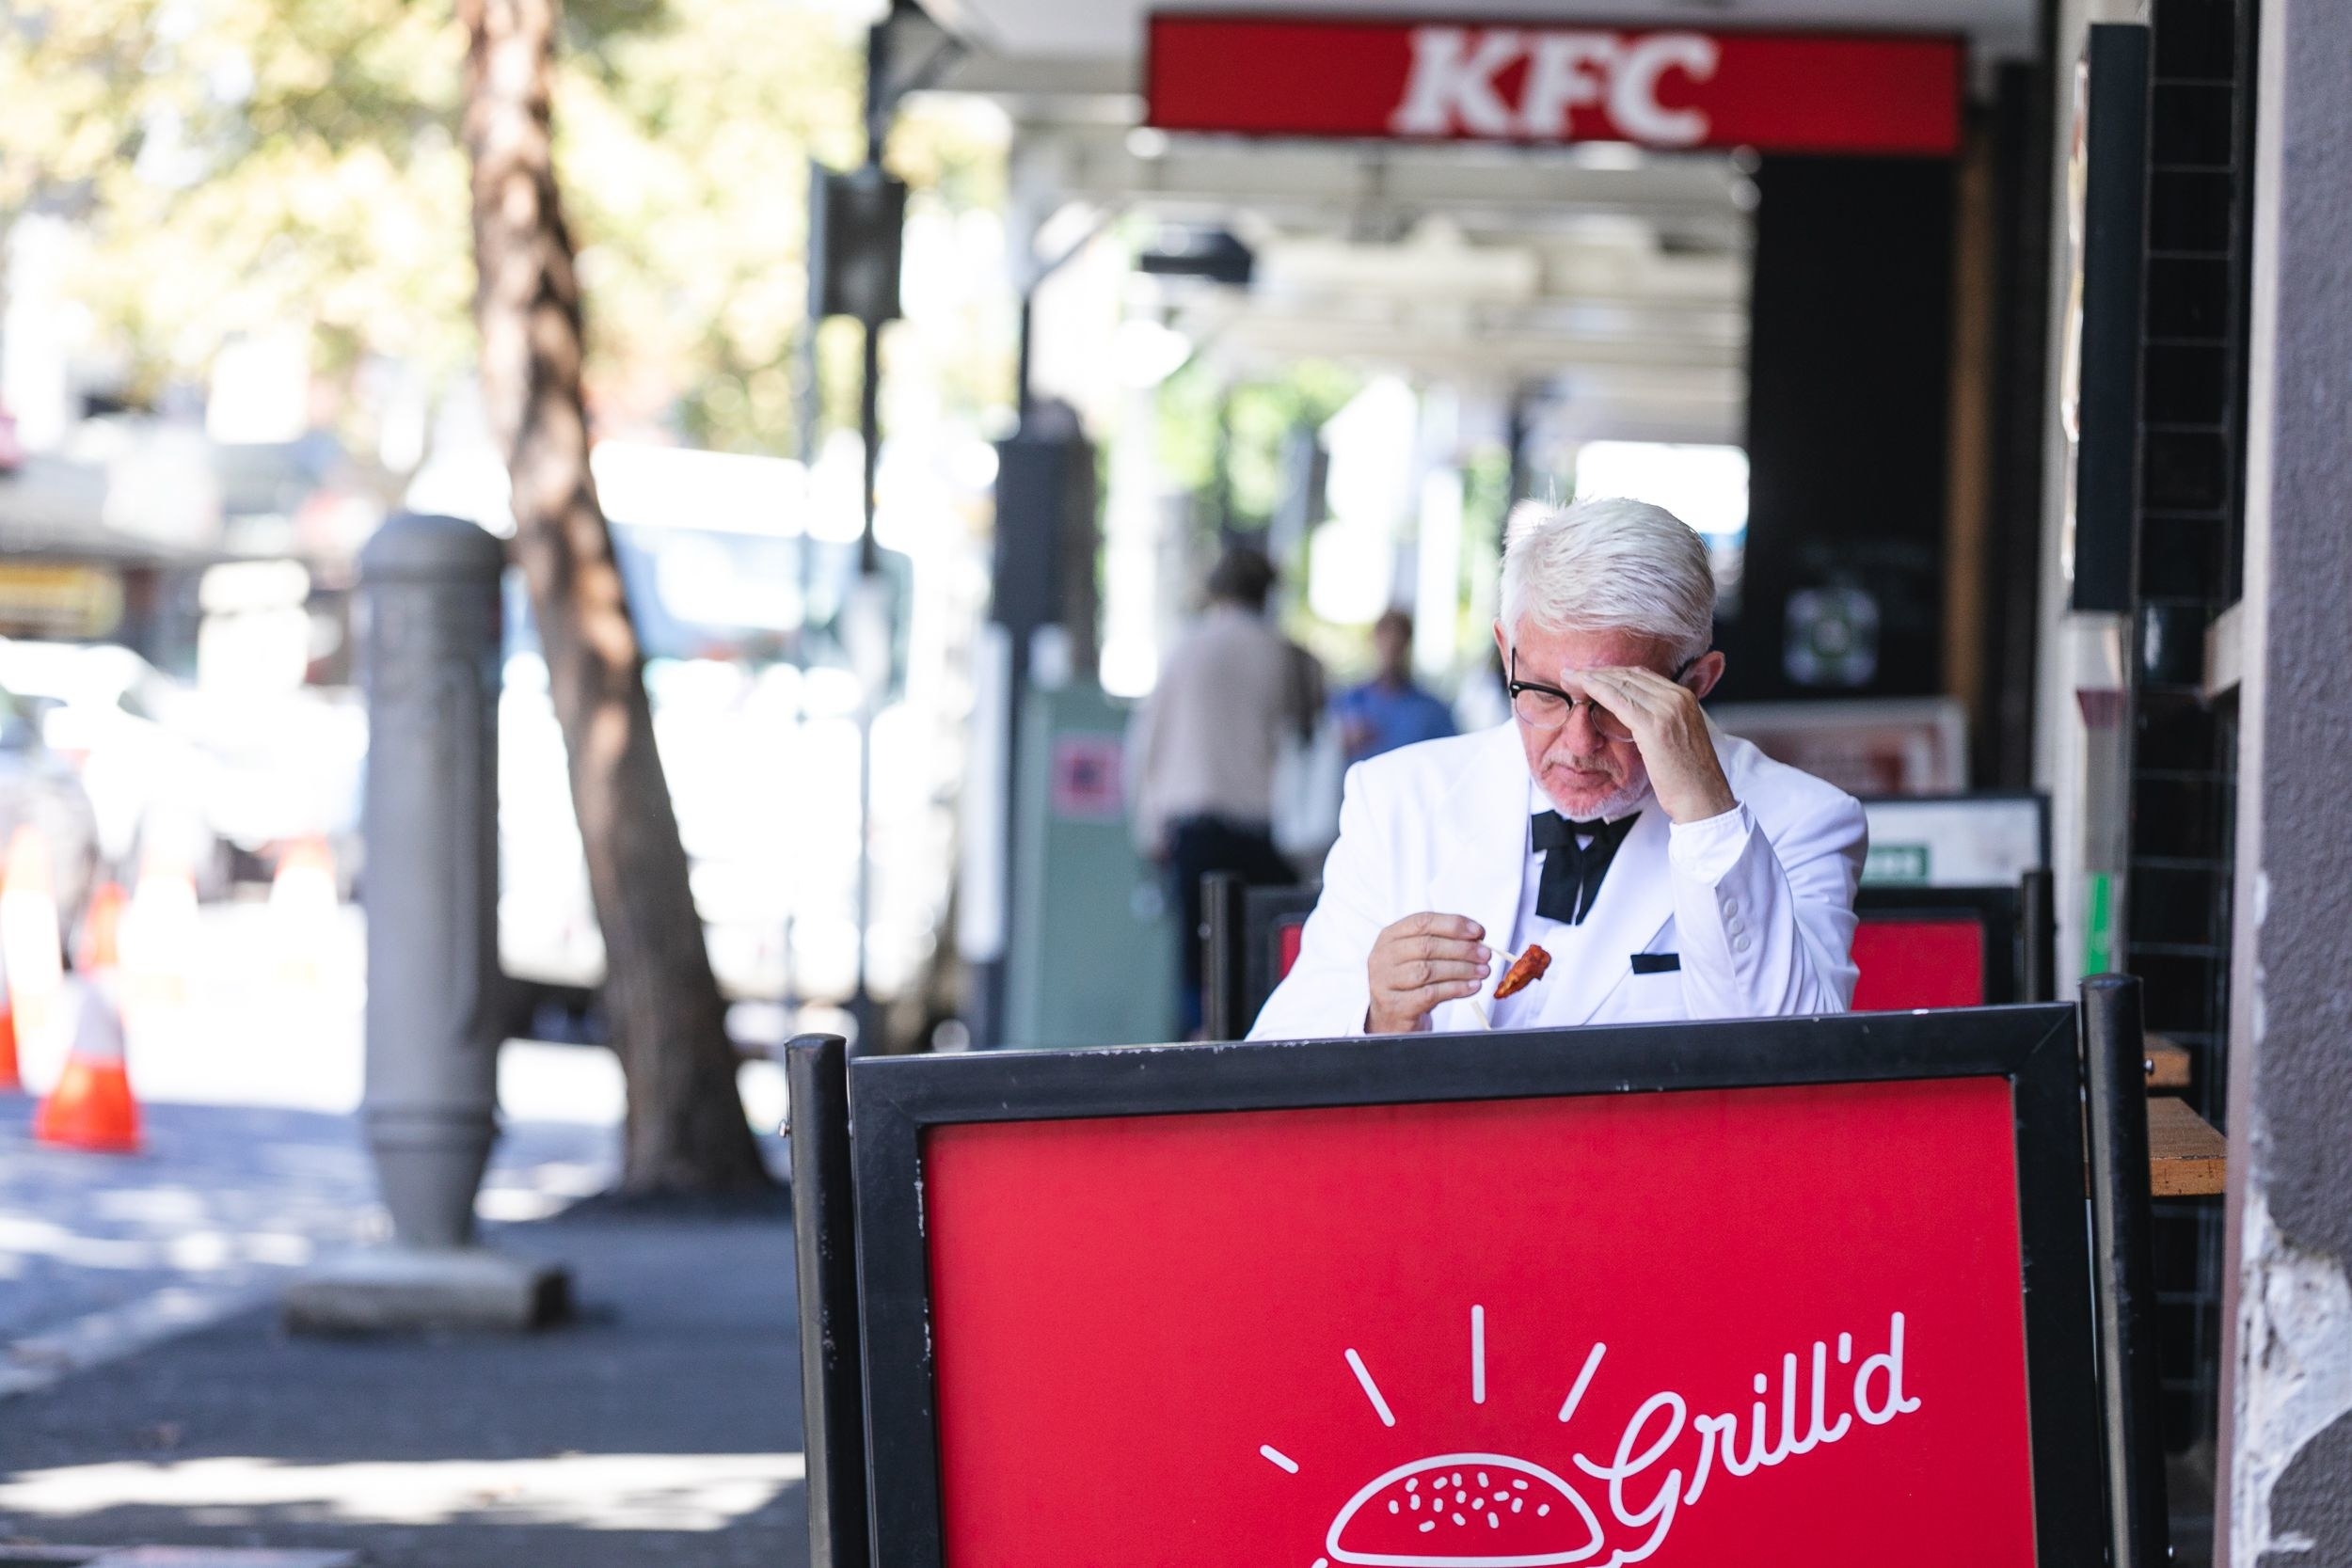 Impersonator eating Grill&#x27;d outside with a KFC store sign perfectly clear in the background
